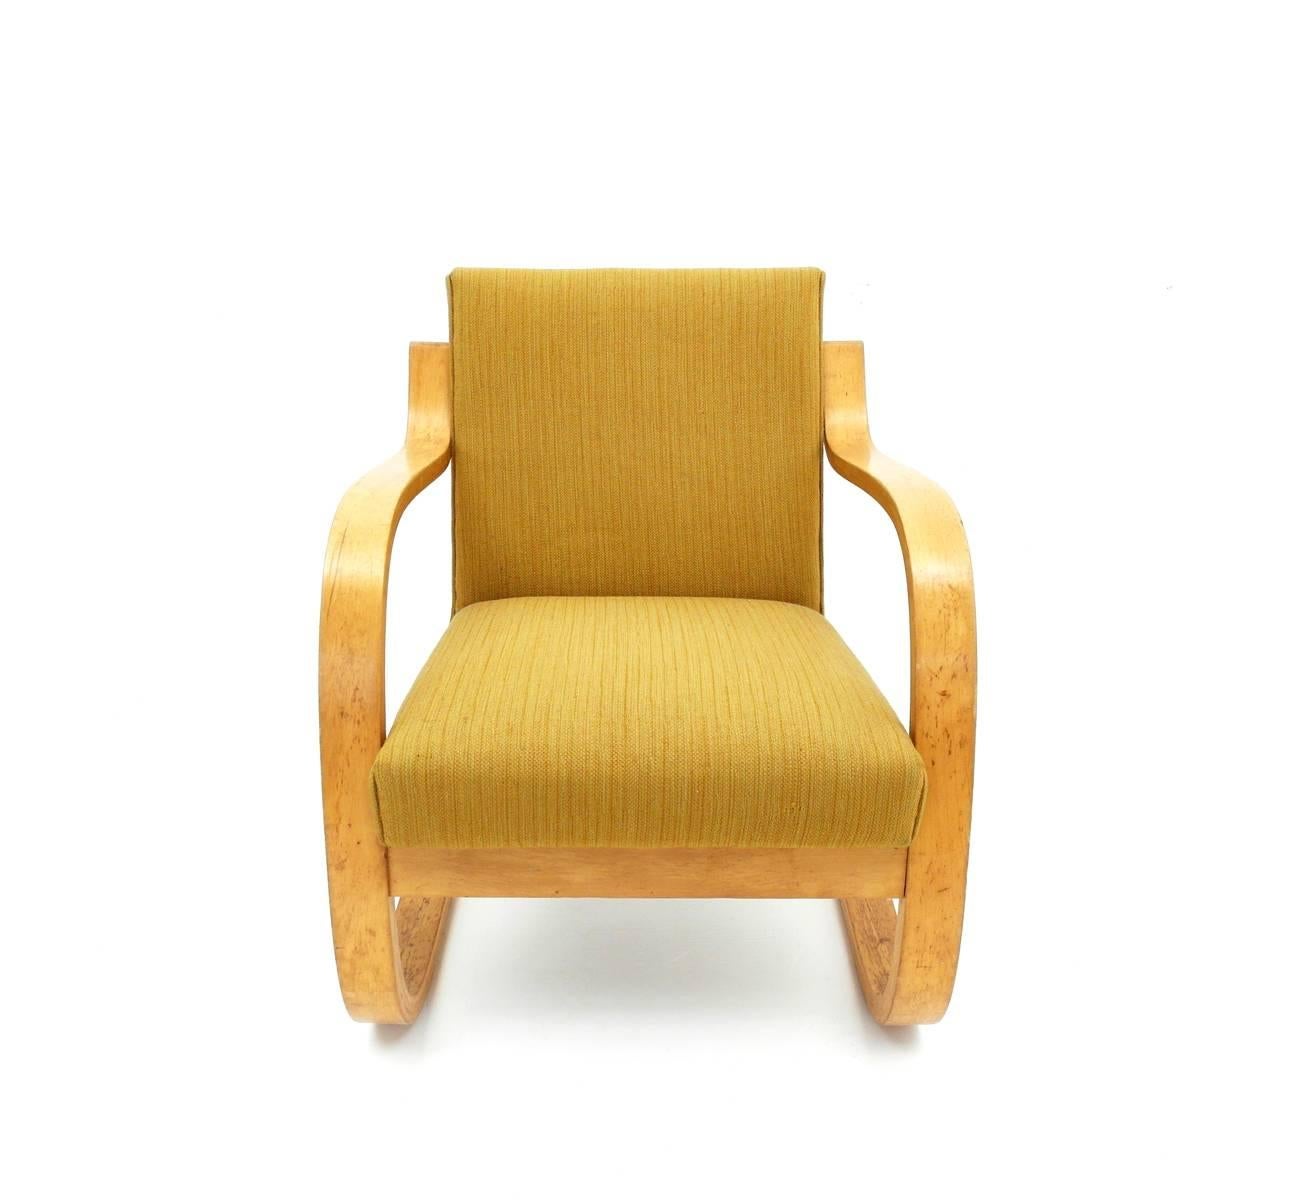 Armchair model 402 designed by Alvar Aalto in 1933. Manufactured by Artek. The chair is marked with a stamp "AALTO DESIGN Made in Finland".
This stamp refers to a rare pre-war Finnish Artek production between 1935 and 1940. Original